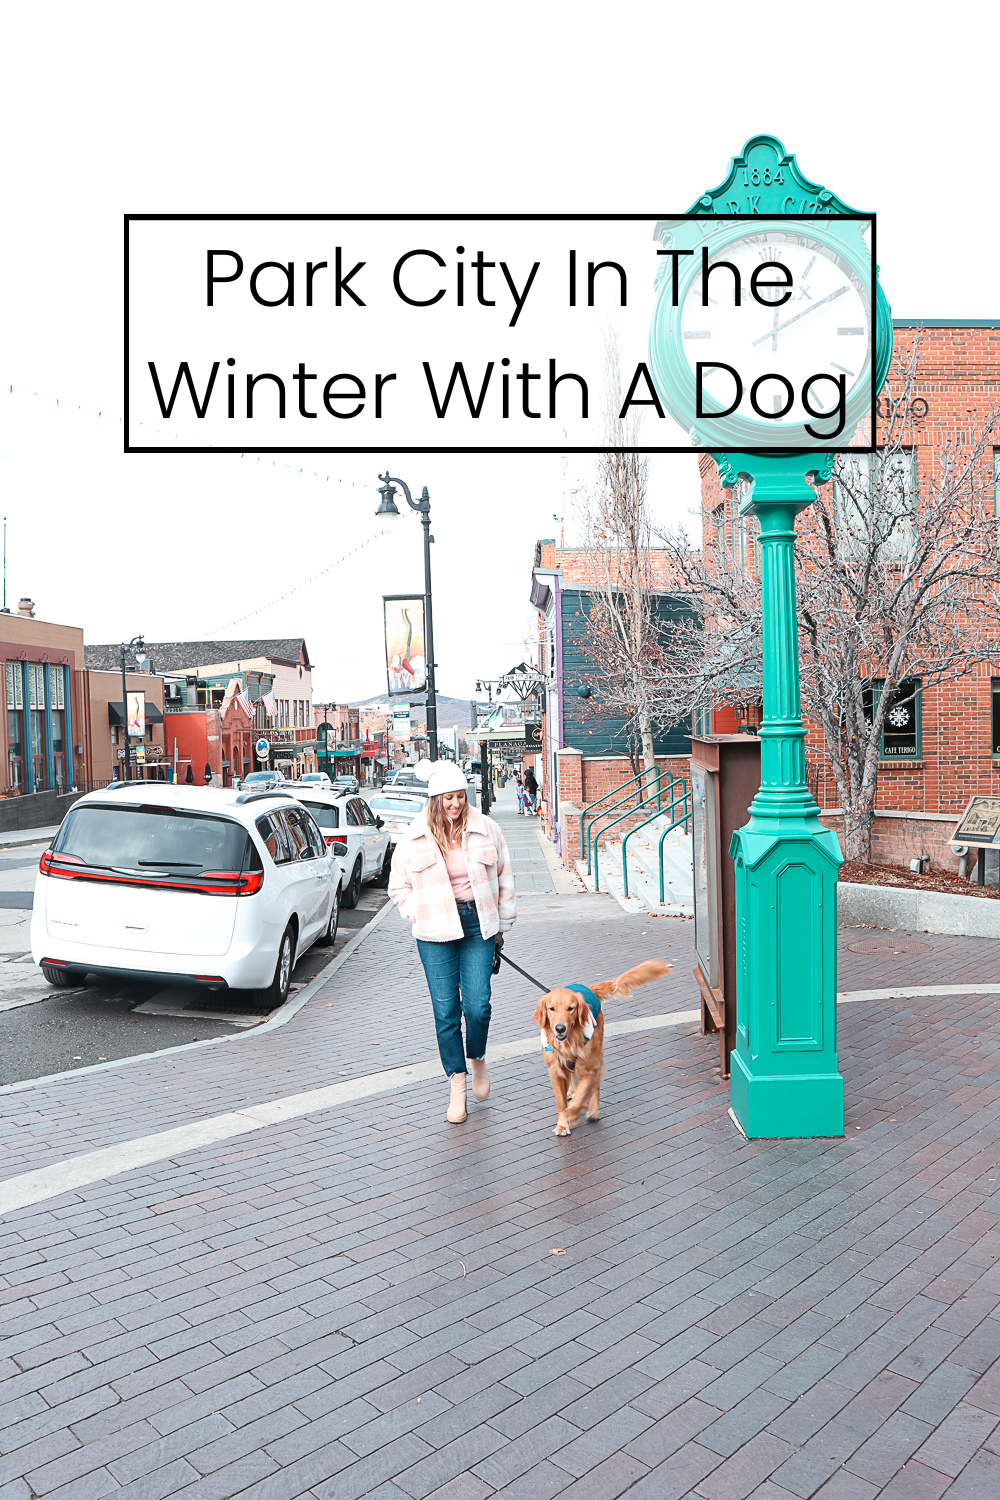 Pacific Globetrotters, budget family travel blog, shares 5 Days in Park City In The Winter With A Dog.